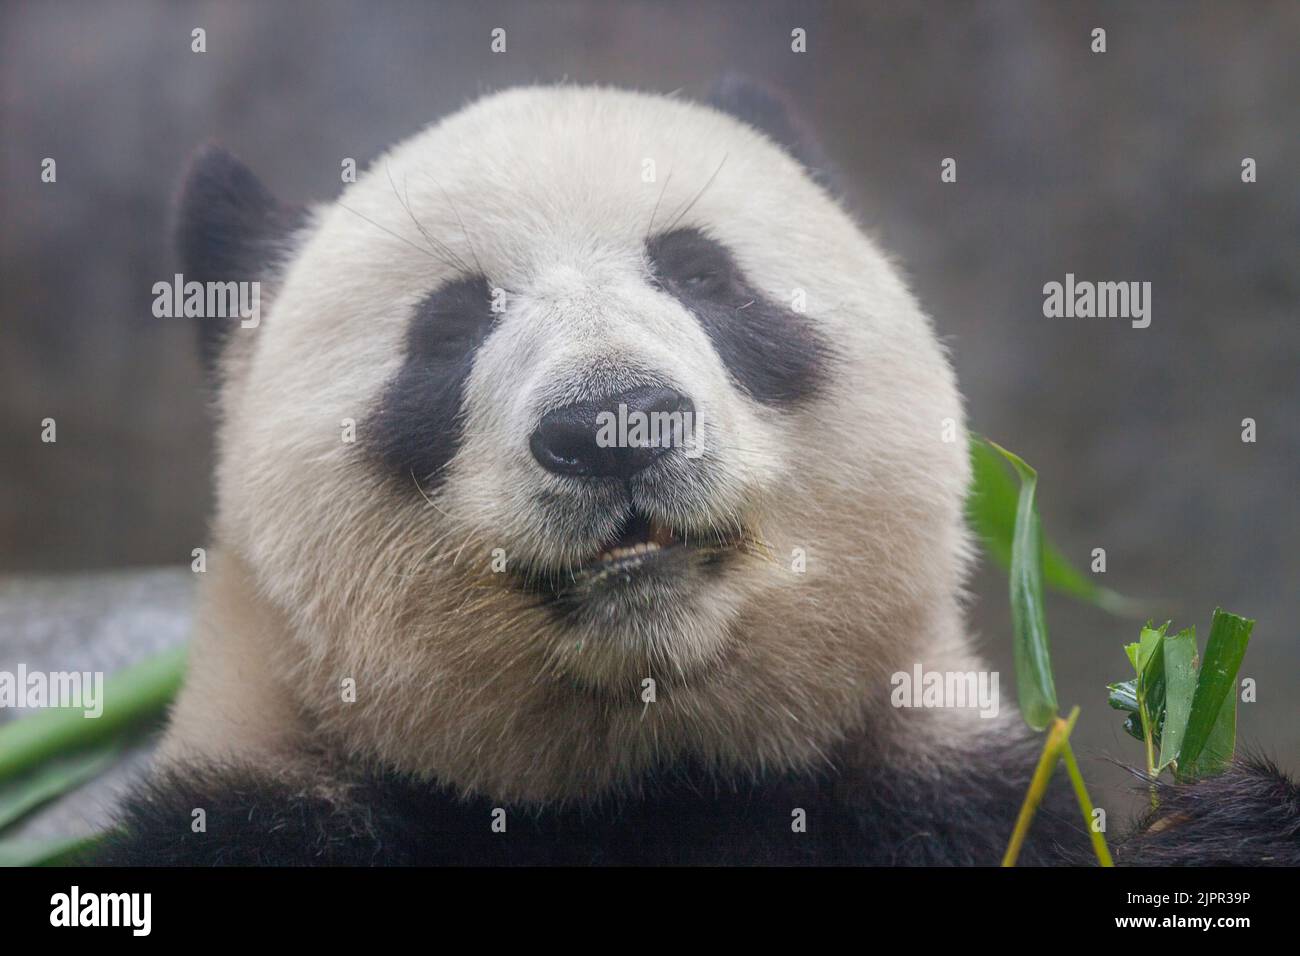 The Giant Panda, Ailuropoda melanoleuca, is a bear native to central-western and south western China. Stock Photo